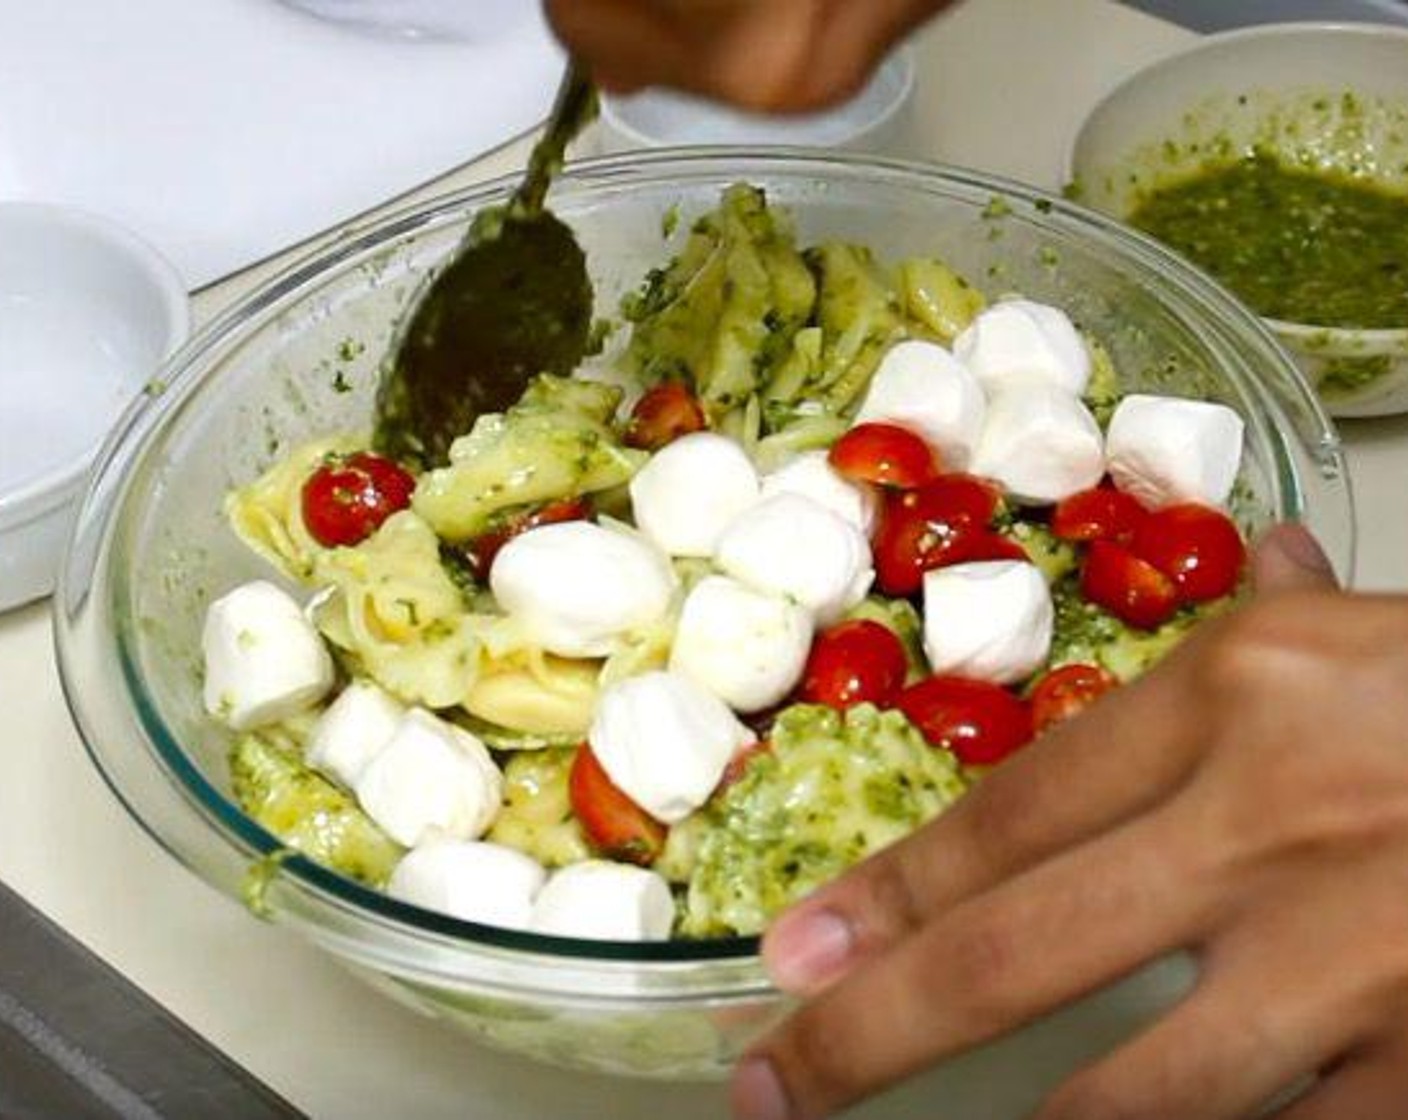 step 2 In the mixing bowl, add Basil Pesto (1 cup), Cherry Tomato (3/4 cup), and Fresh Mozzarella Cheese Ball (24). Mix together.